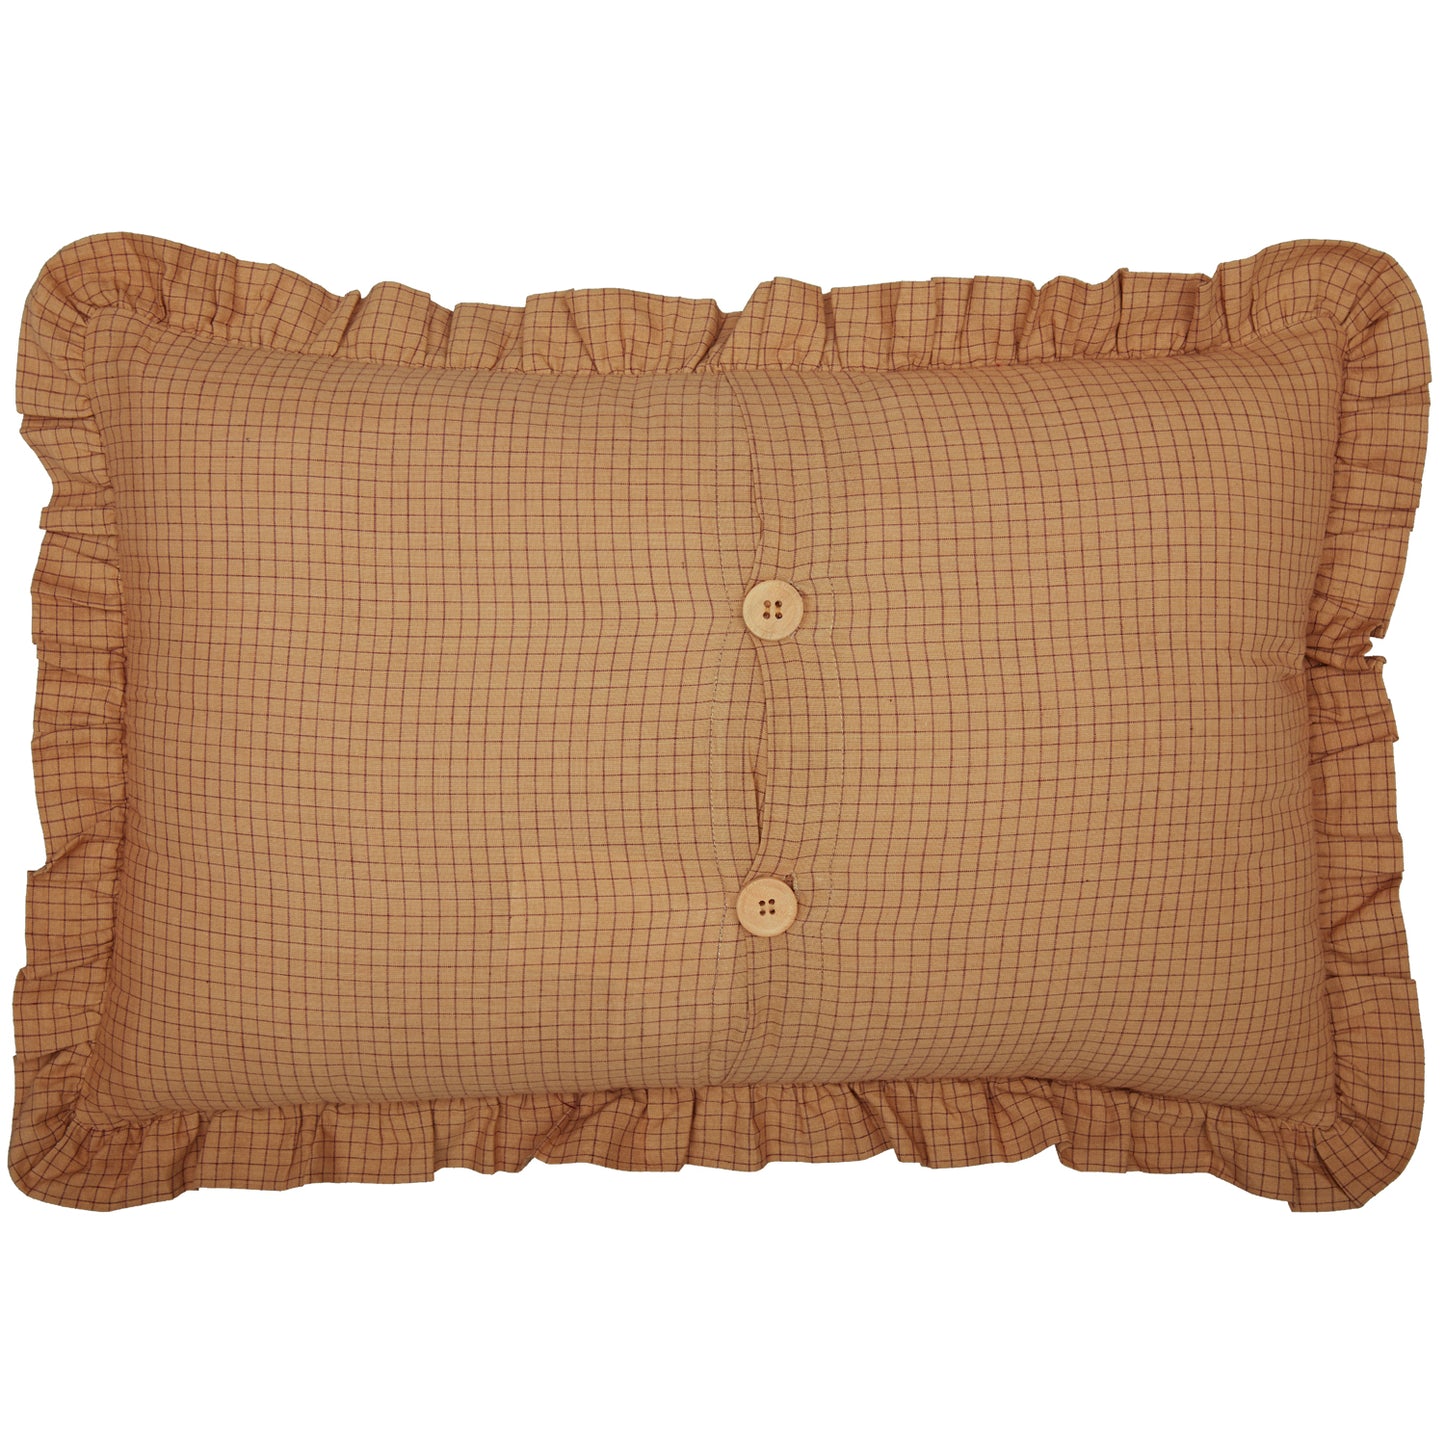 56730-Landon-Welcome-to-Our-Patch-Pillow-14x22-image-6